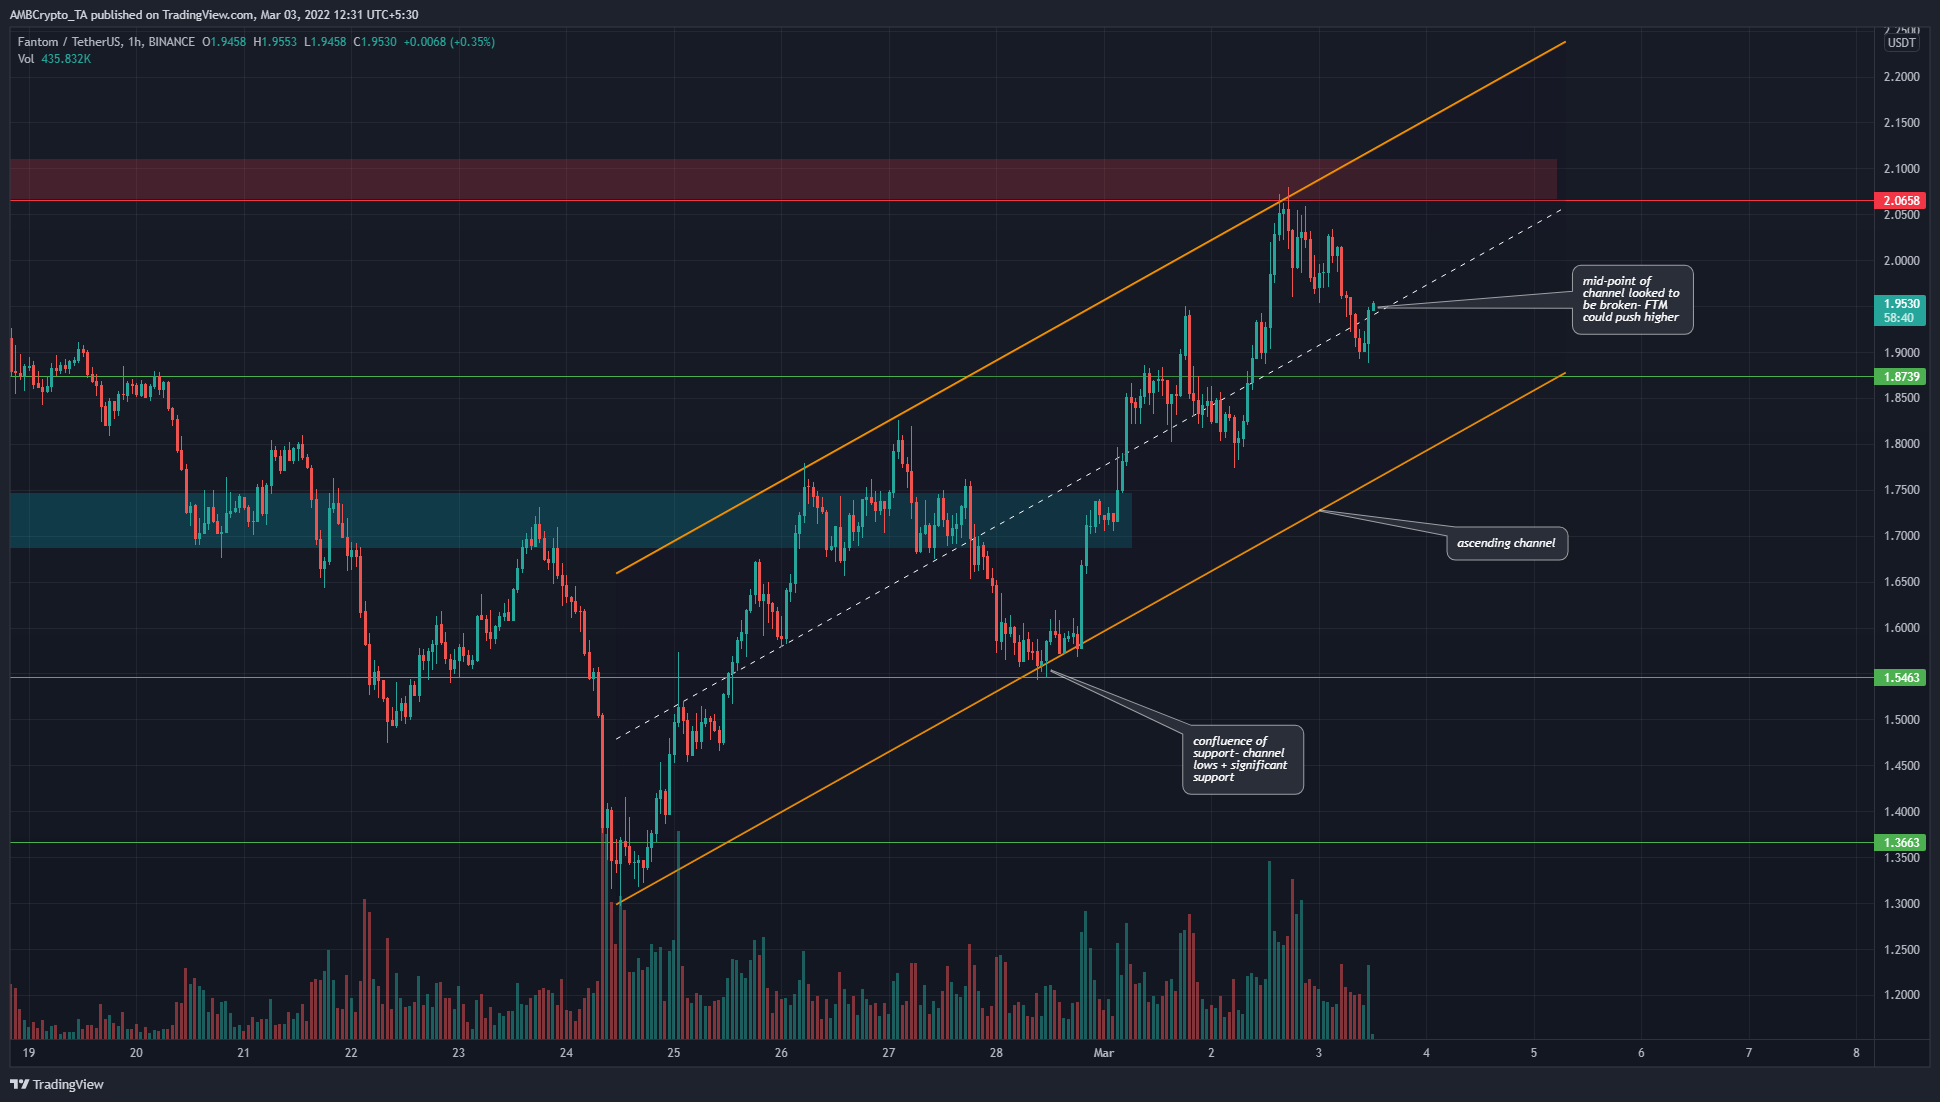 Fantom rode the bullish wave higher, needs to break this level to continue surfing upward